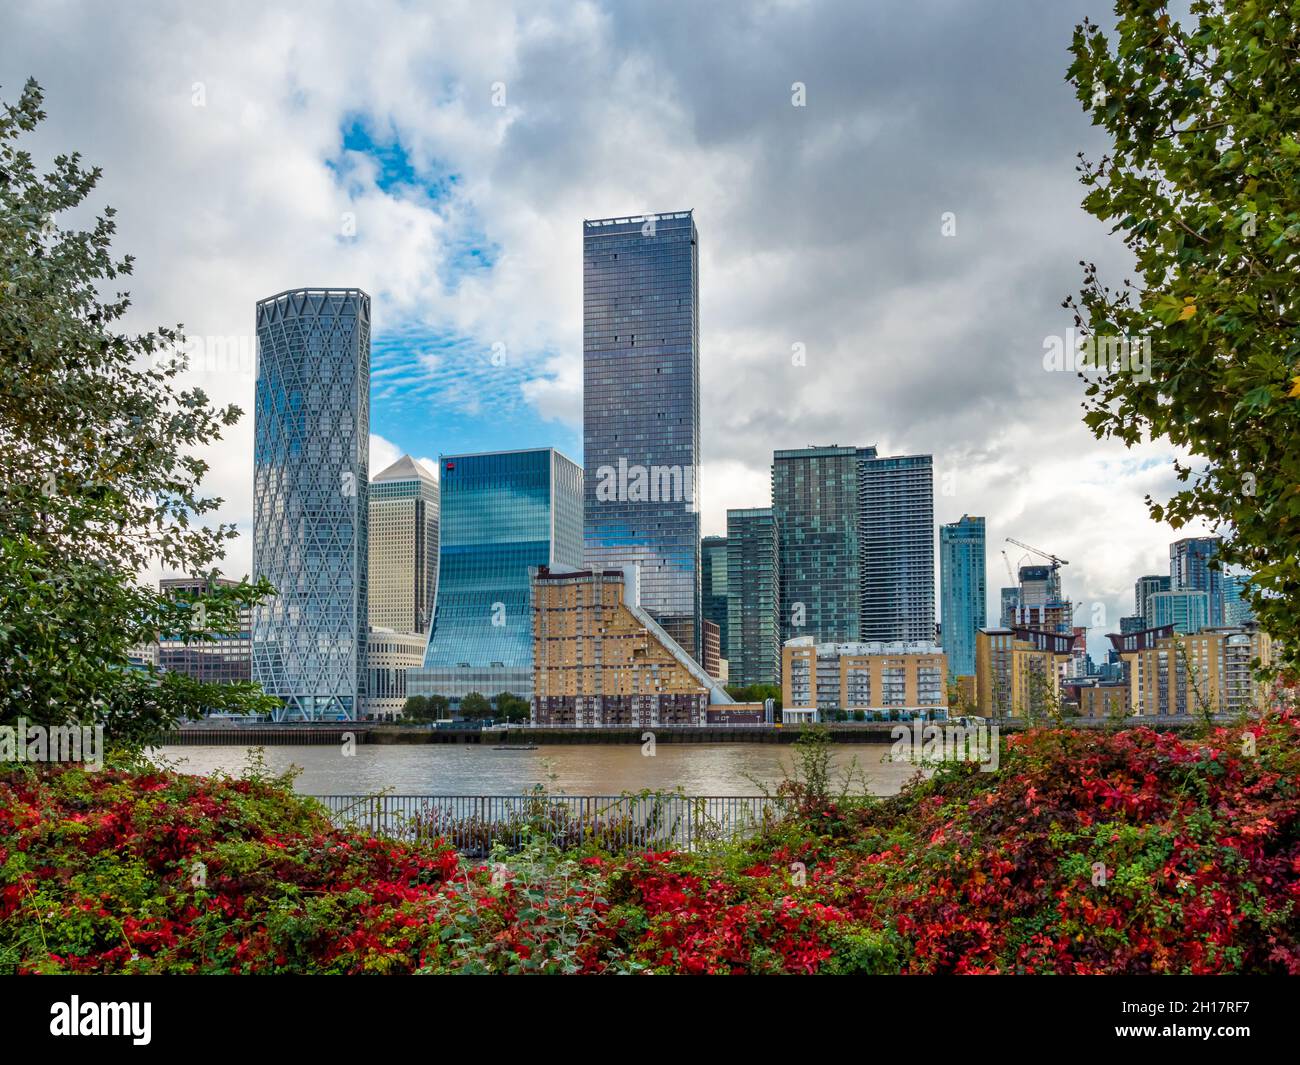 London, England, United Kingdom - October 14, 2021: Wide view of the famous modern buildings across the River Thames, Canary Wharf Stock Photo